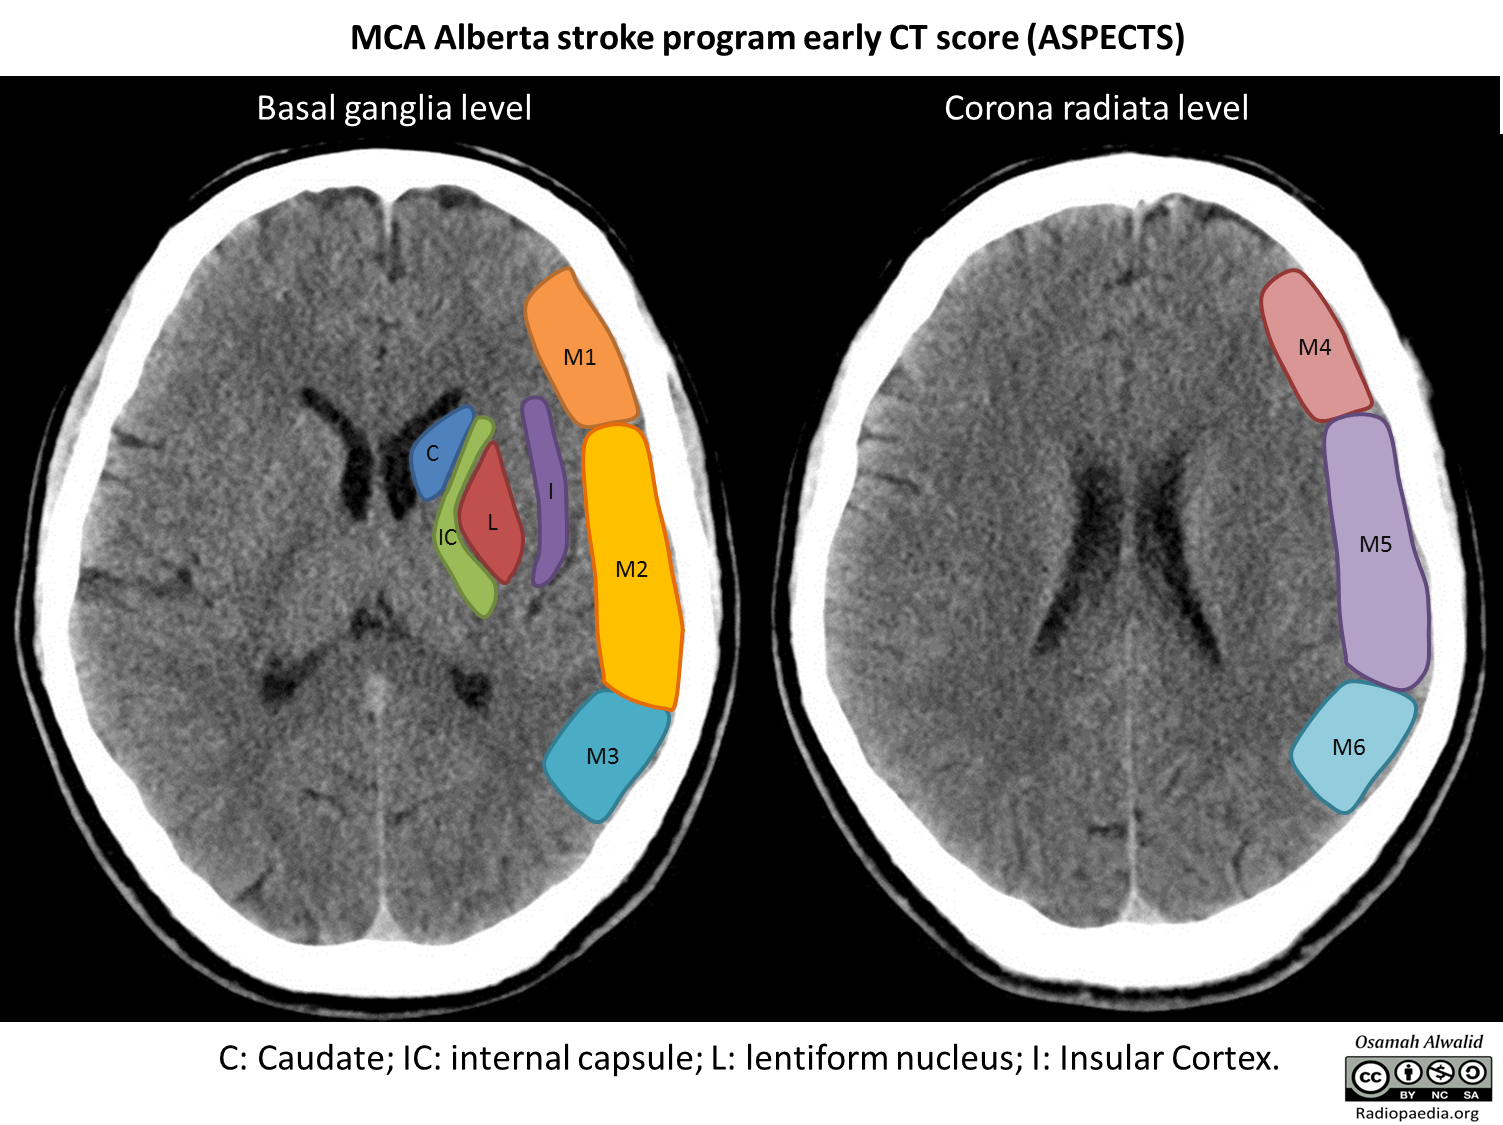 Caption: Illustration of the Alberta stroke program early CT score (ASPECTS) of the middle cerebral artery. Case courtesy of Dr Osamah A. A. Alwalid, <a href="https://radiopaedia.org/">Radiopaedia.org</a>. From the case <a href="https://radiopaedia.org/cases/72706">rID: 72706</a>